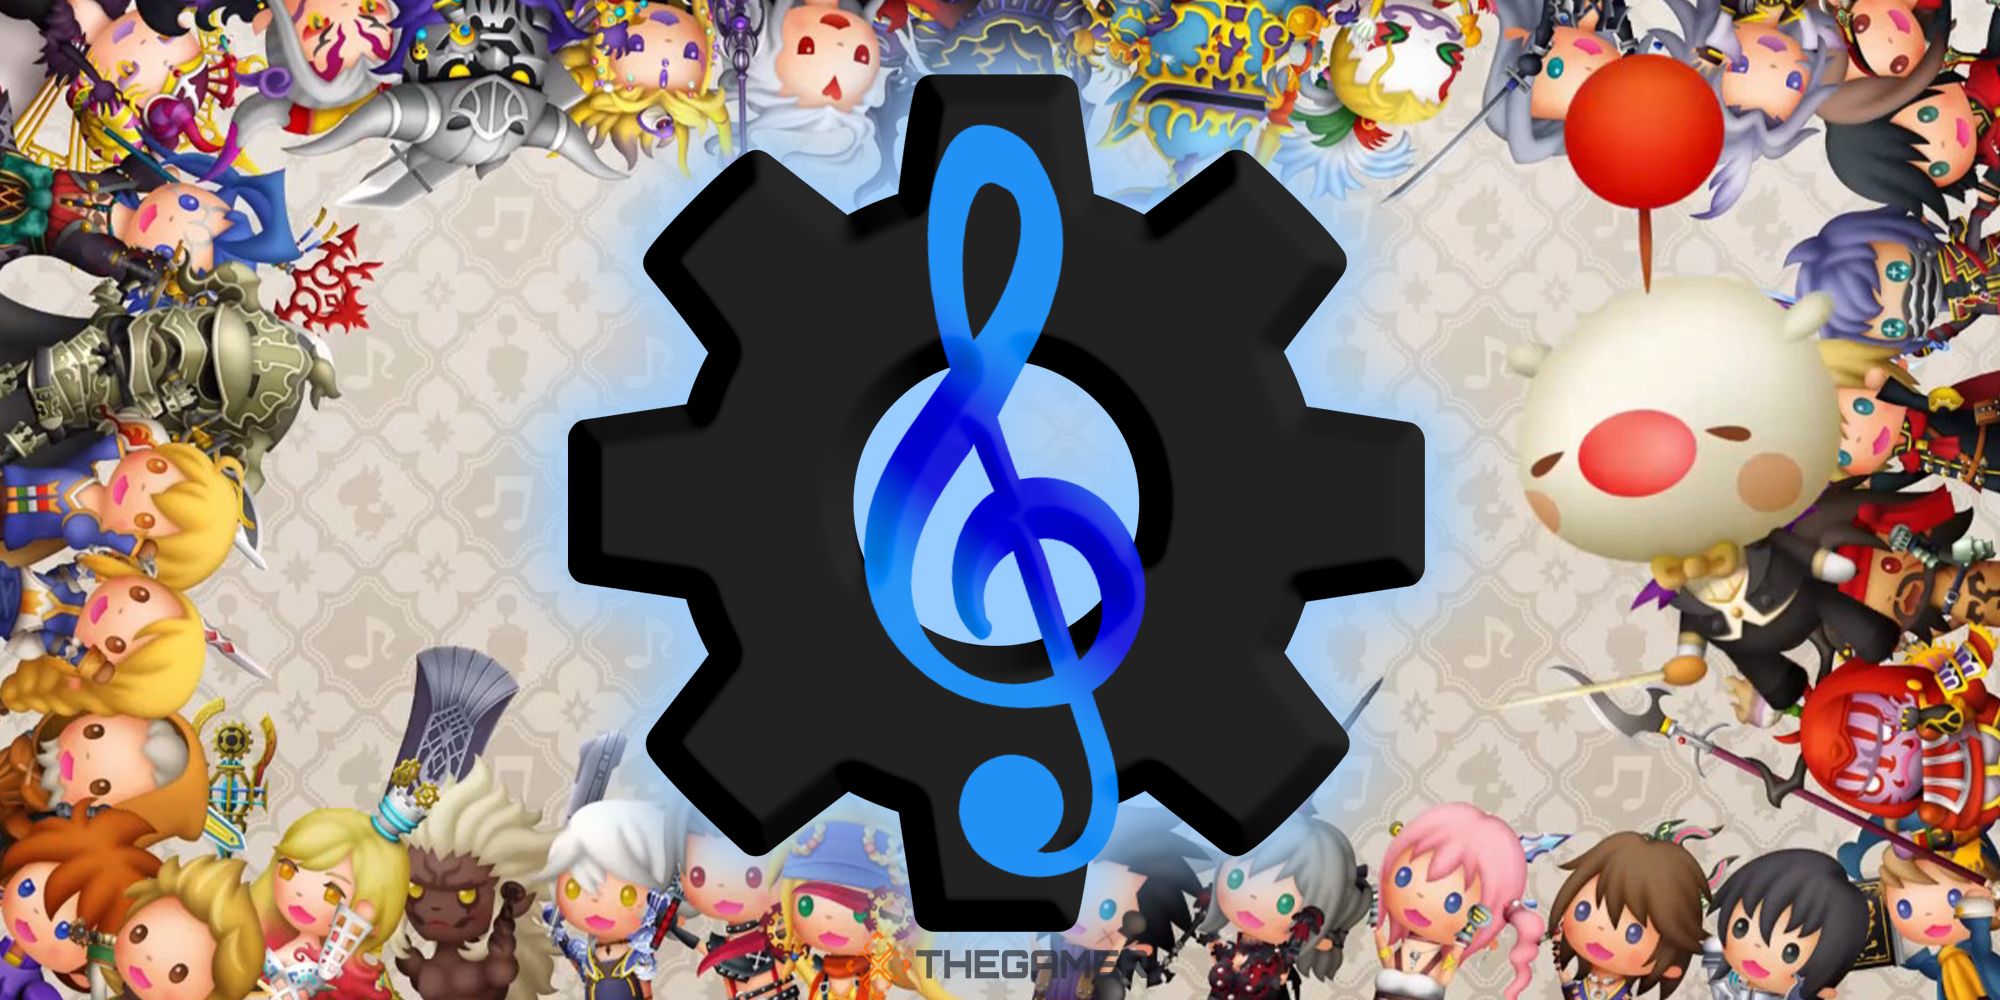 Theatrhythm: Final Bar Line's cast of heroes and villains gather around a treble clef with a cog behind it.